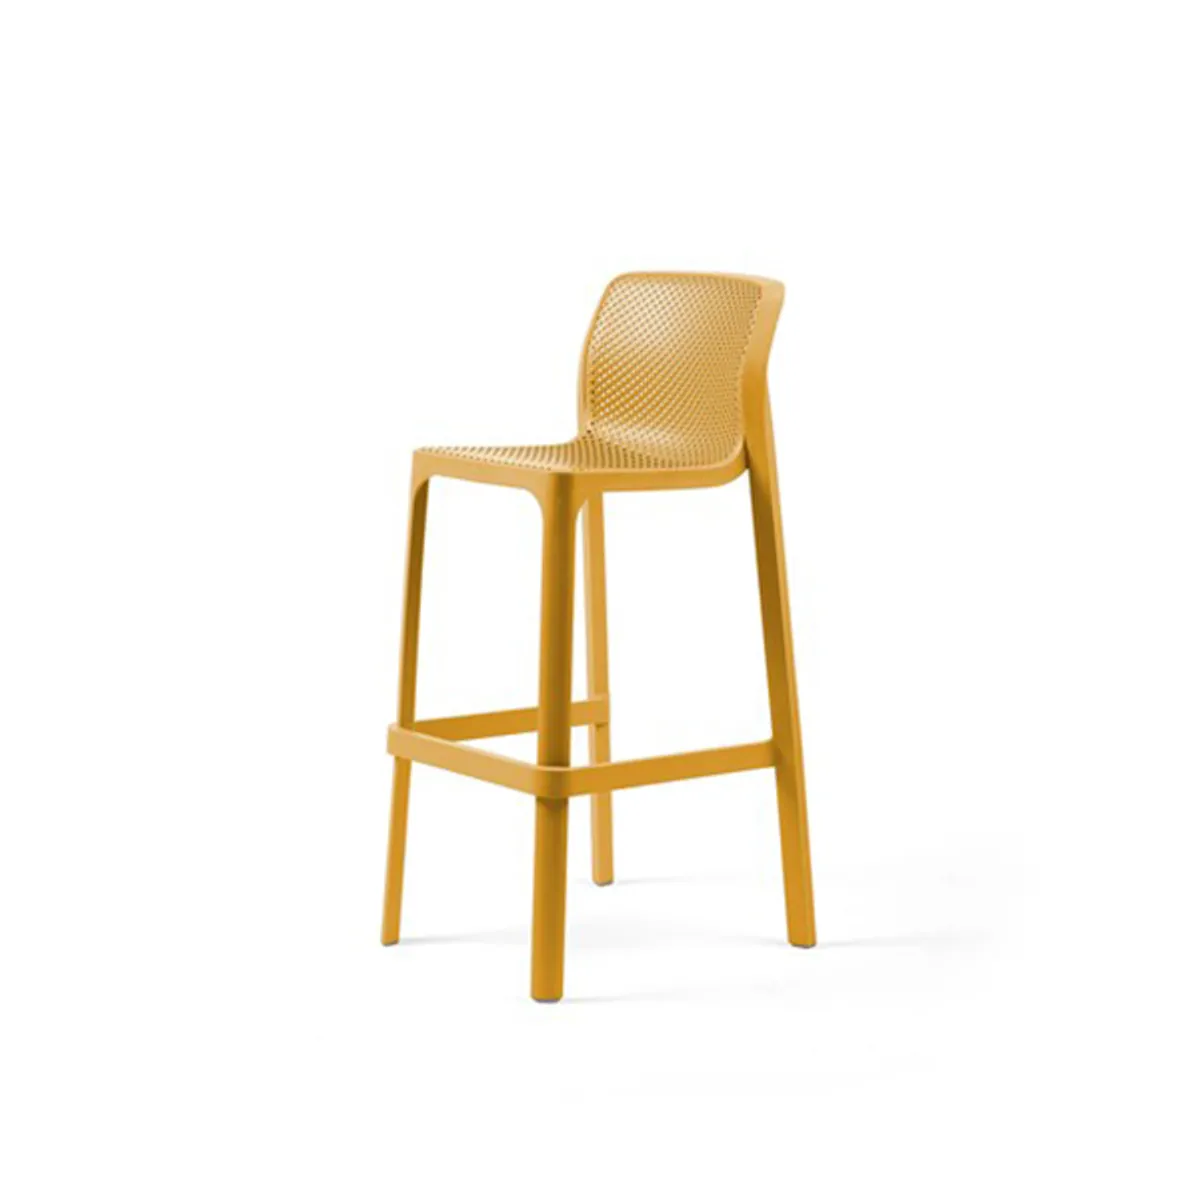 Tequila Bar Stool For Outdoors In Yellow